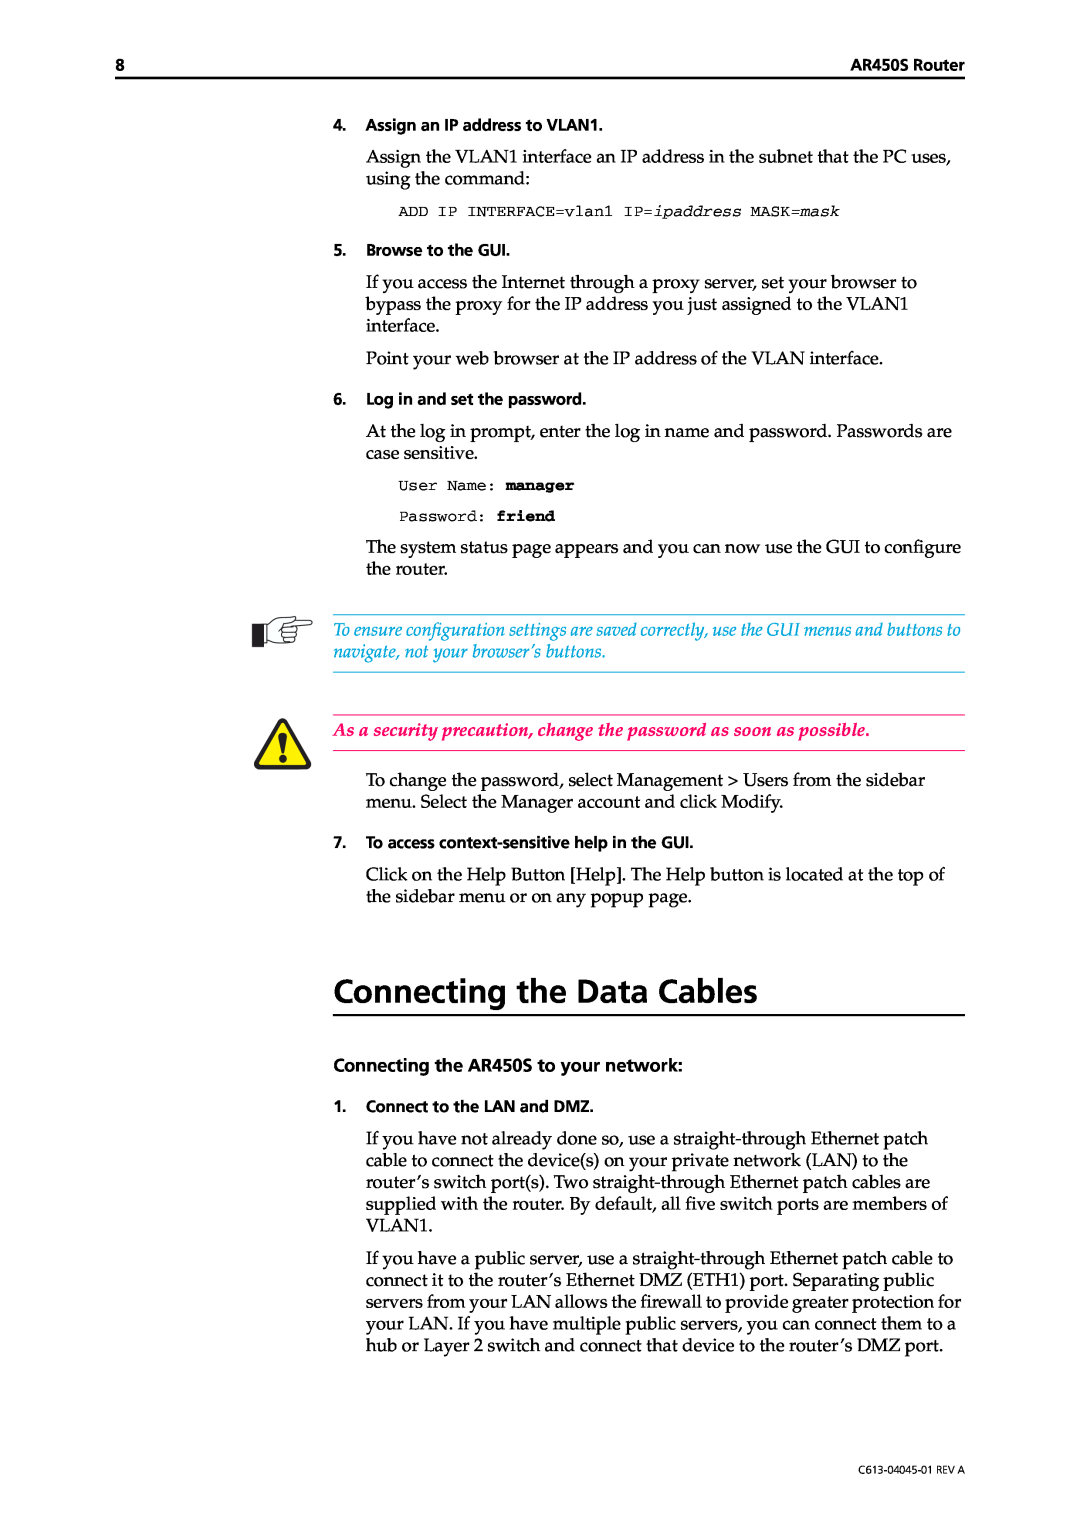 Allied Telesis manual Connecting the Data Cables, Connecting the AR450S to your network 